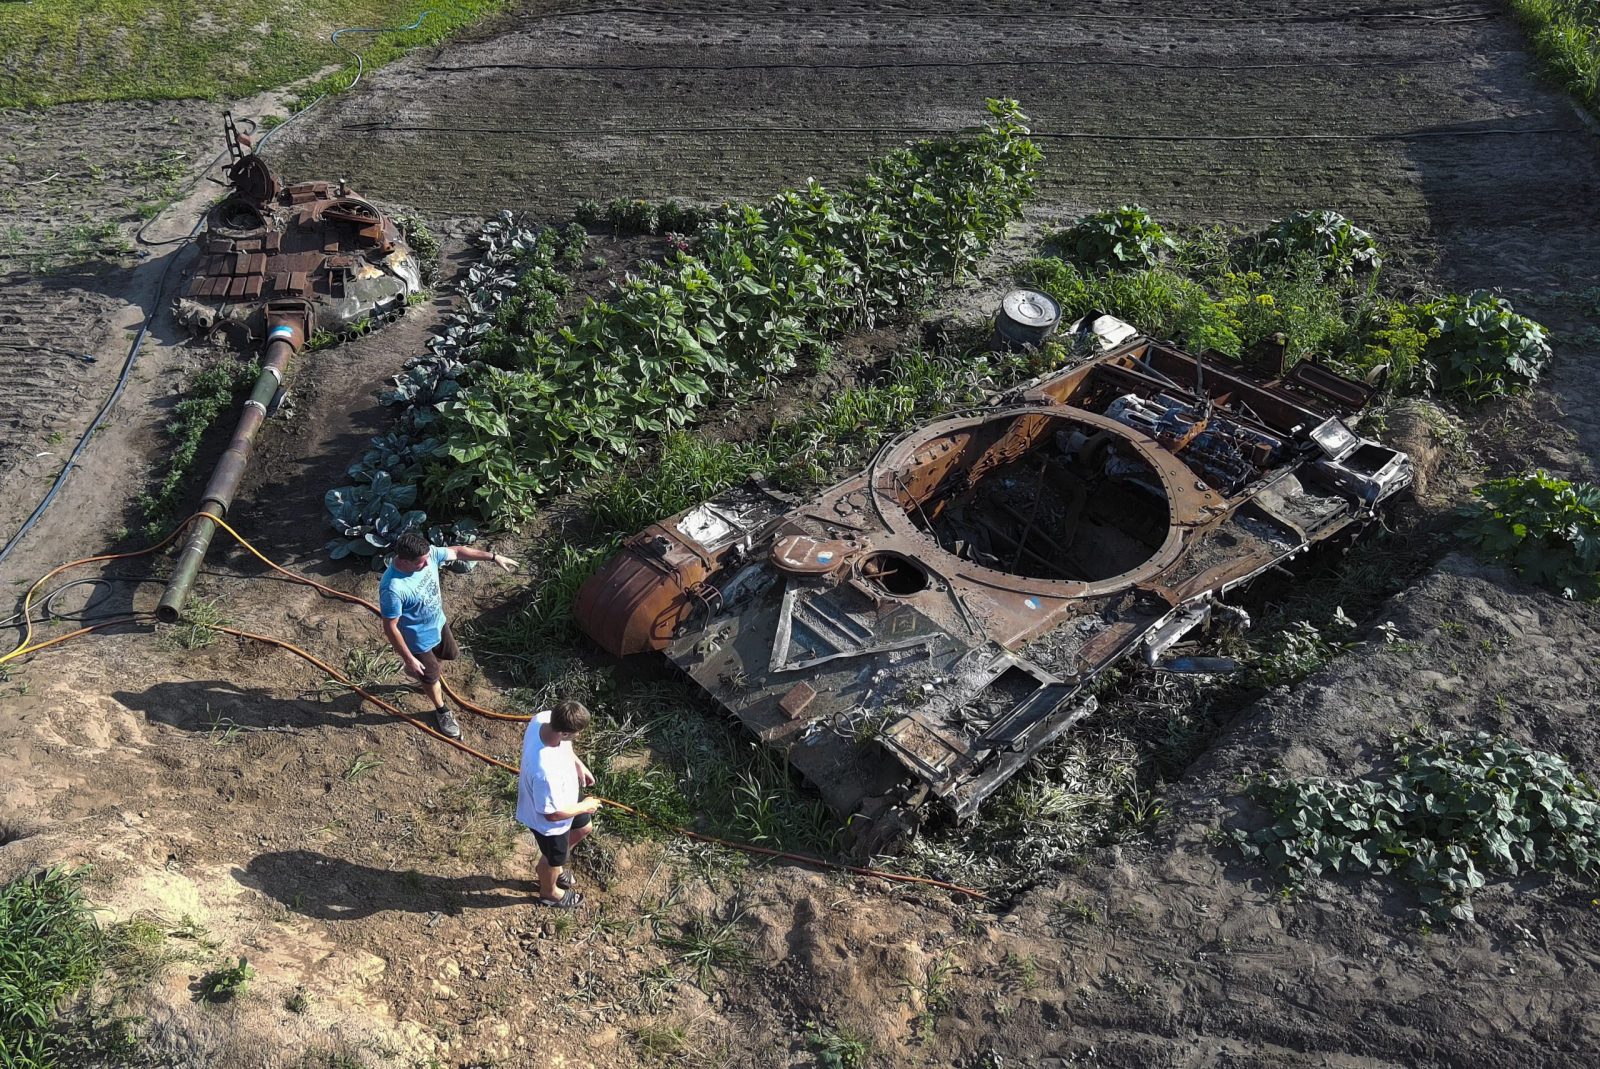 epa10734043 An aerial photo taken with a drone shows local men looking at the remains of a Russian tank in the middle of a garden at the village of Velyka Dymerka, Kyiv region, Ukraine, 05 July 2023 (issued 08 July 2023). Valeriy and Yulia Semynog, together with their three children, left their home when Russian troops arrived at Velyka Dymerka in March 2022. The family returned to their village only after Russian troops were pushed out from the Kyiv region in April 2022. They found their home destroyed along with the wreckage of a Russian tank in the garden. The locals planted flowers and vegetables between and around the wreckage of the tank. Velyka Dymerka as well as other towns and villages in the northern part of the Kyiv region, had become battlefields, heavily shelled, causing death and damage when Russian troops tried to reach the Ukrainian capital of Kyiv in February and March 2022.The war in Ukraine, marks on 08 July its 500th day.  According to the UN more than 9000 civilians have been killed since the war started.  EPA/SERGEY DOLZHENKO